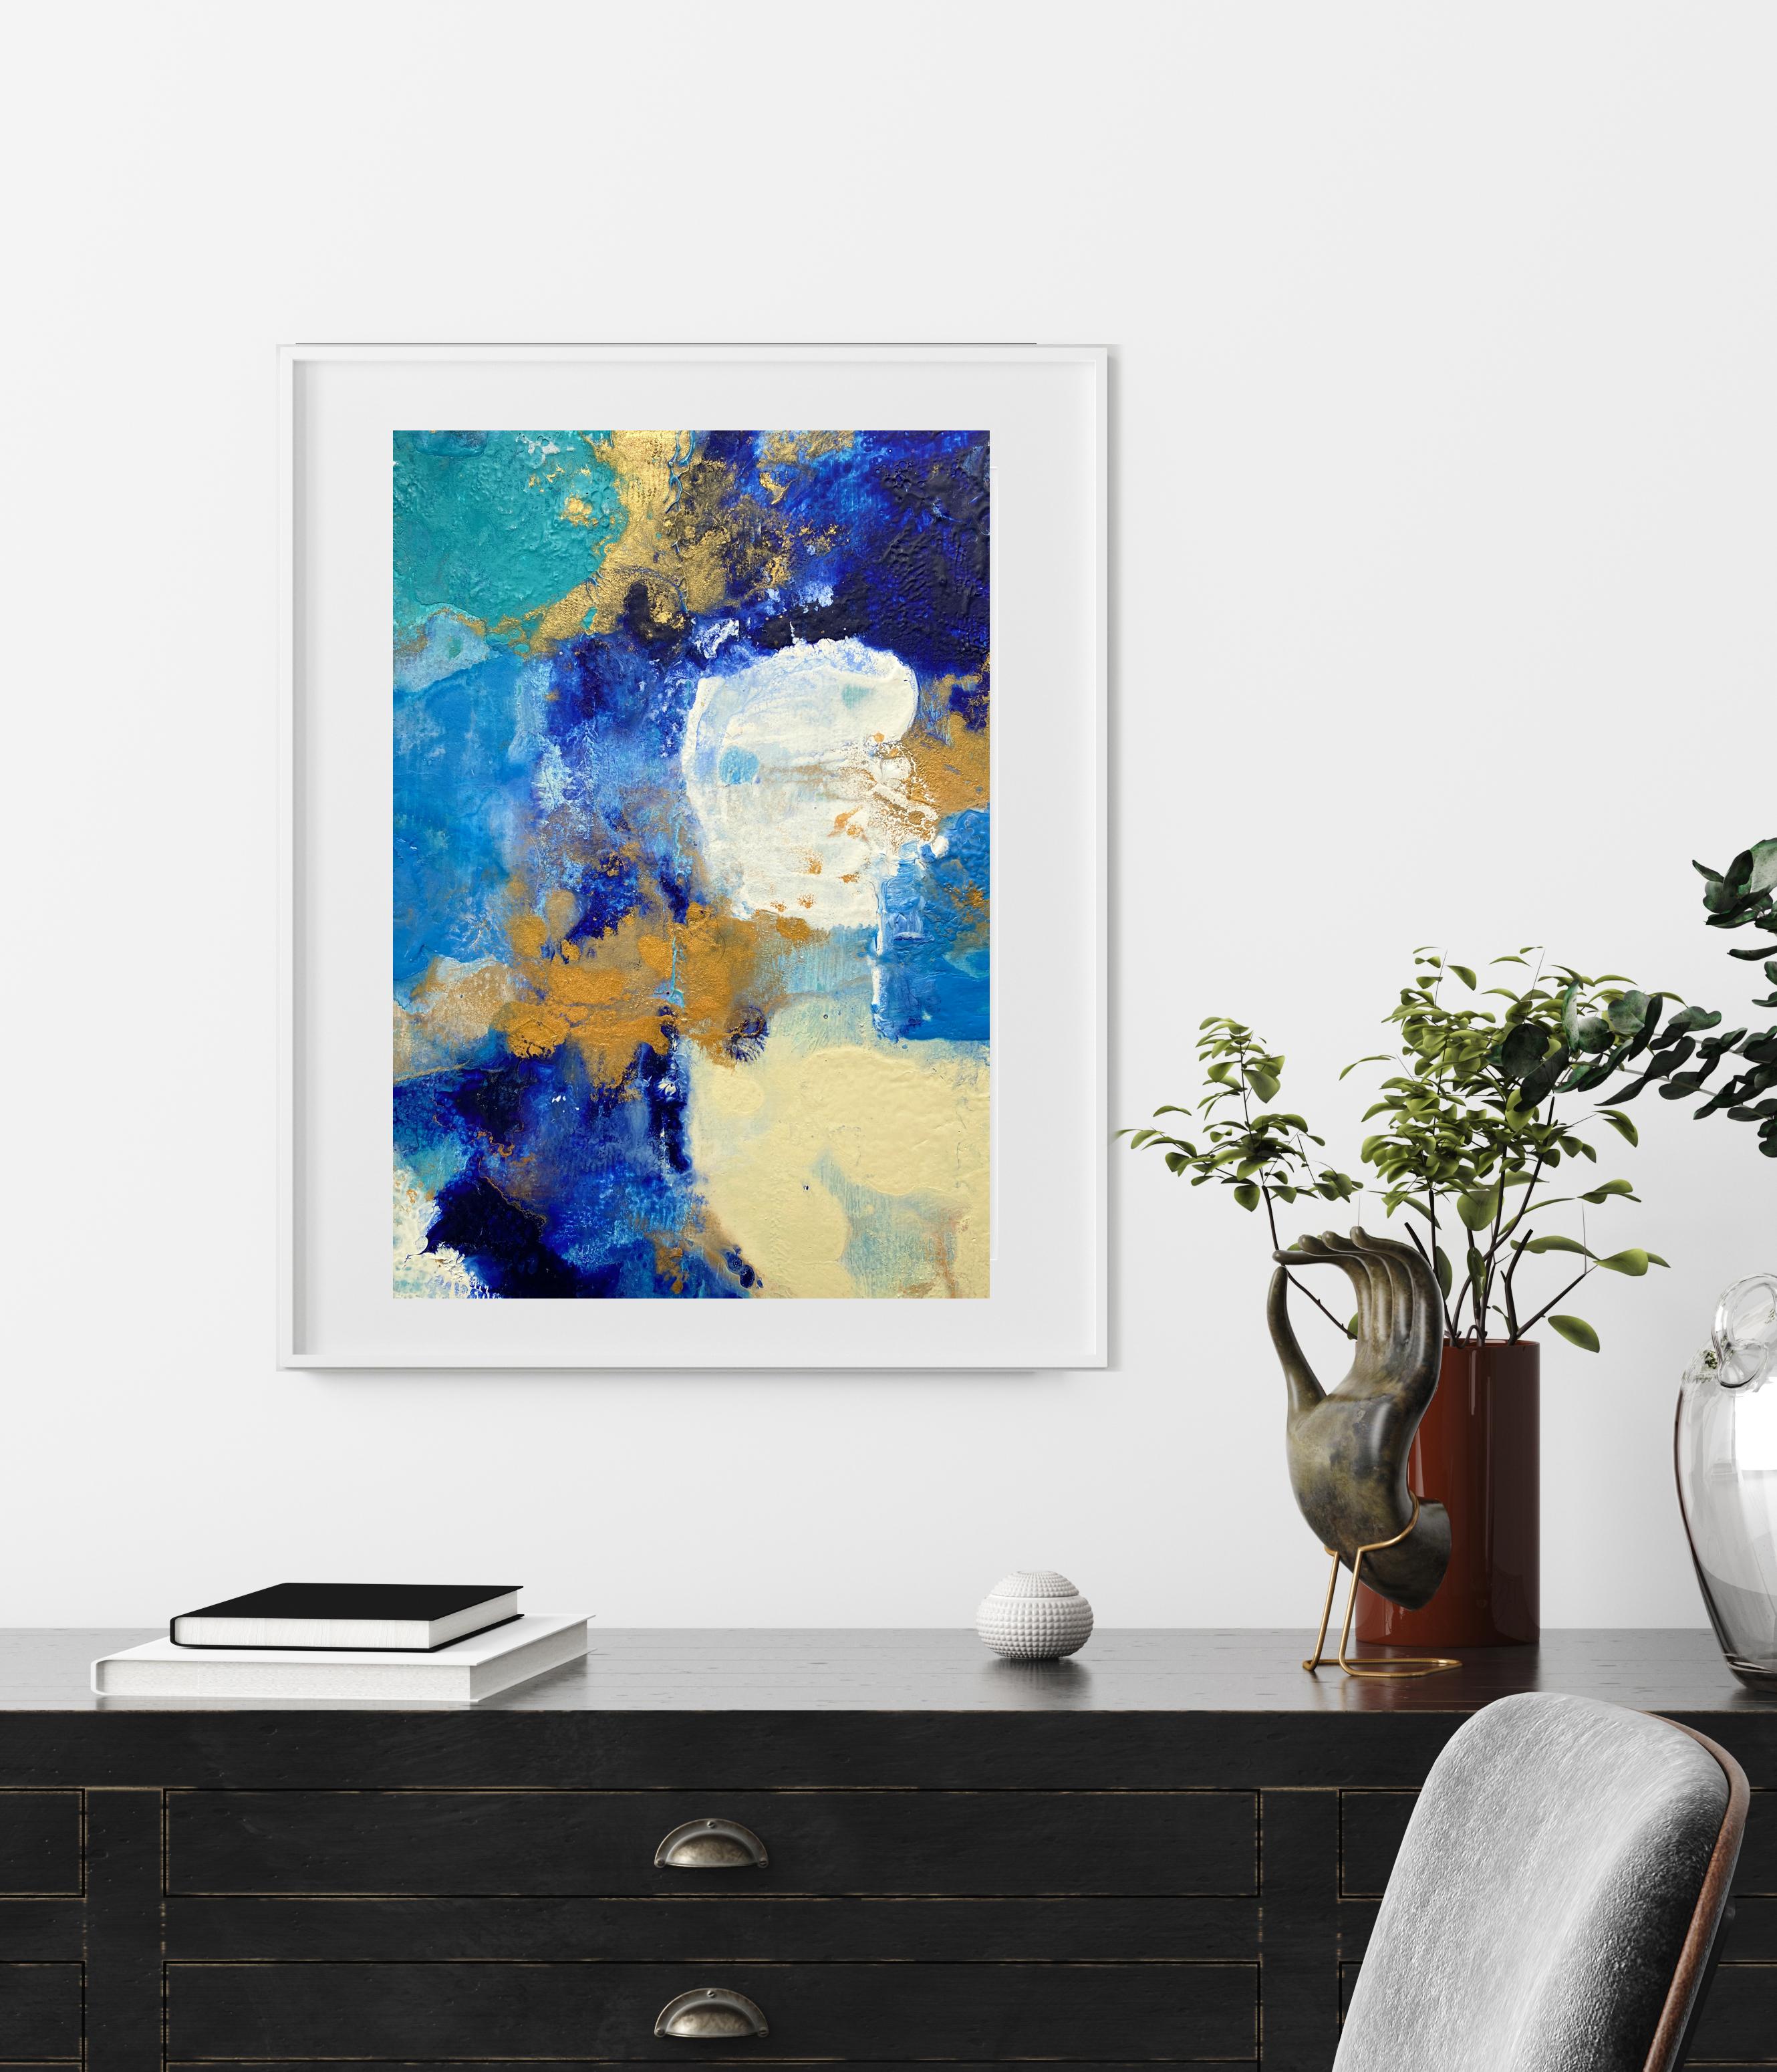 Water and Cloud Series no3 small abstract on paper framed in white mat board - Painting by Kathleen Rhee